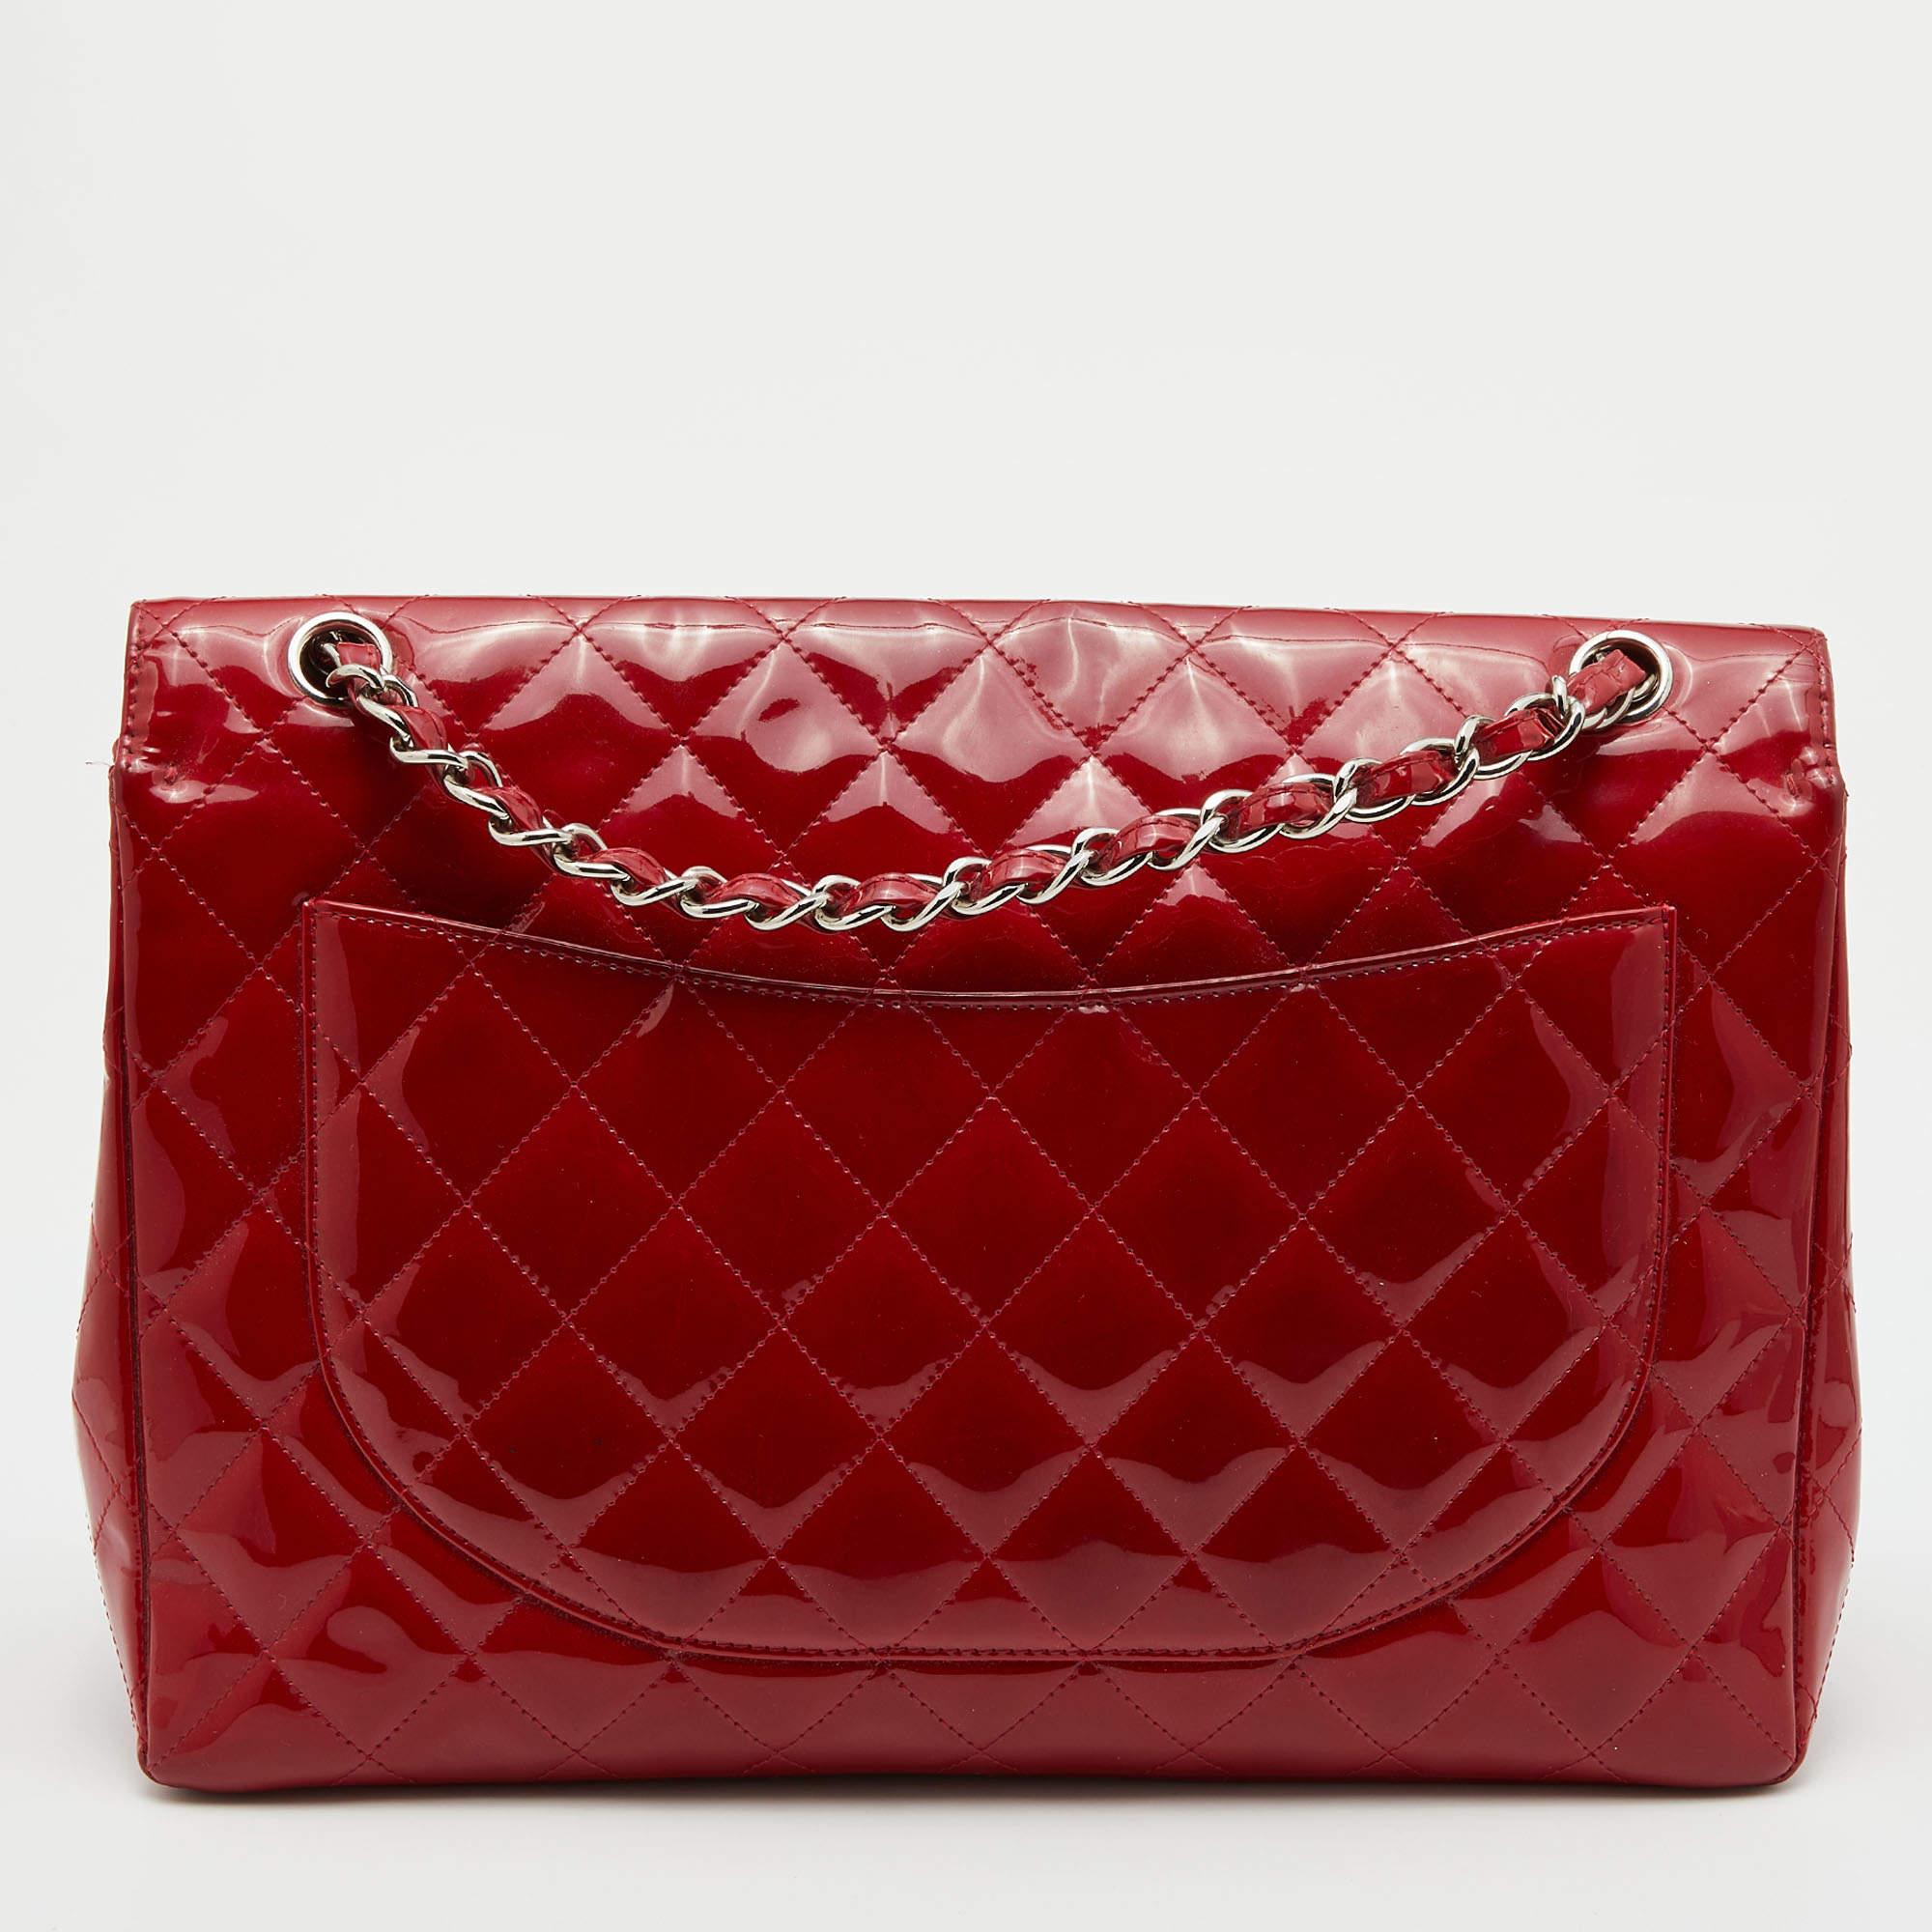 Chanel's luxurious Classic Flap bag is a must-have in a well-curated wardrobe! This stunning bag has a masterfully-crafted leather exterior with silver-tone hardware and the iconic CC logo on the front. This Maxi Classic Classic Single Flap is